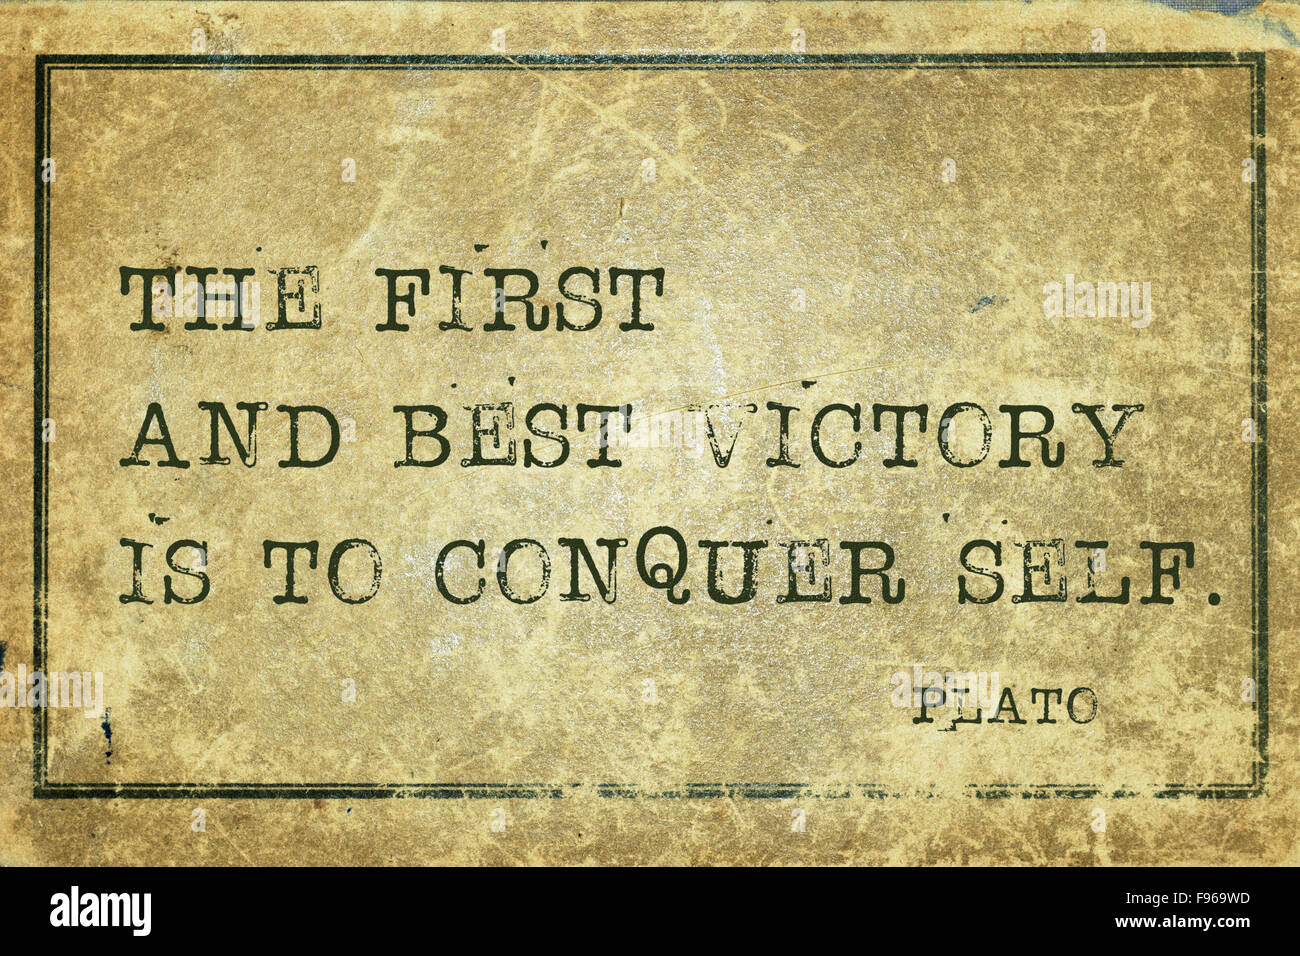 The first and best victory is to conquer self - ancient Greek philosopher Plato quote printed on grunge vintage cardboard Stock Photo